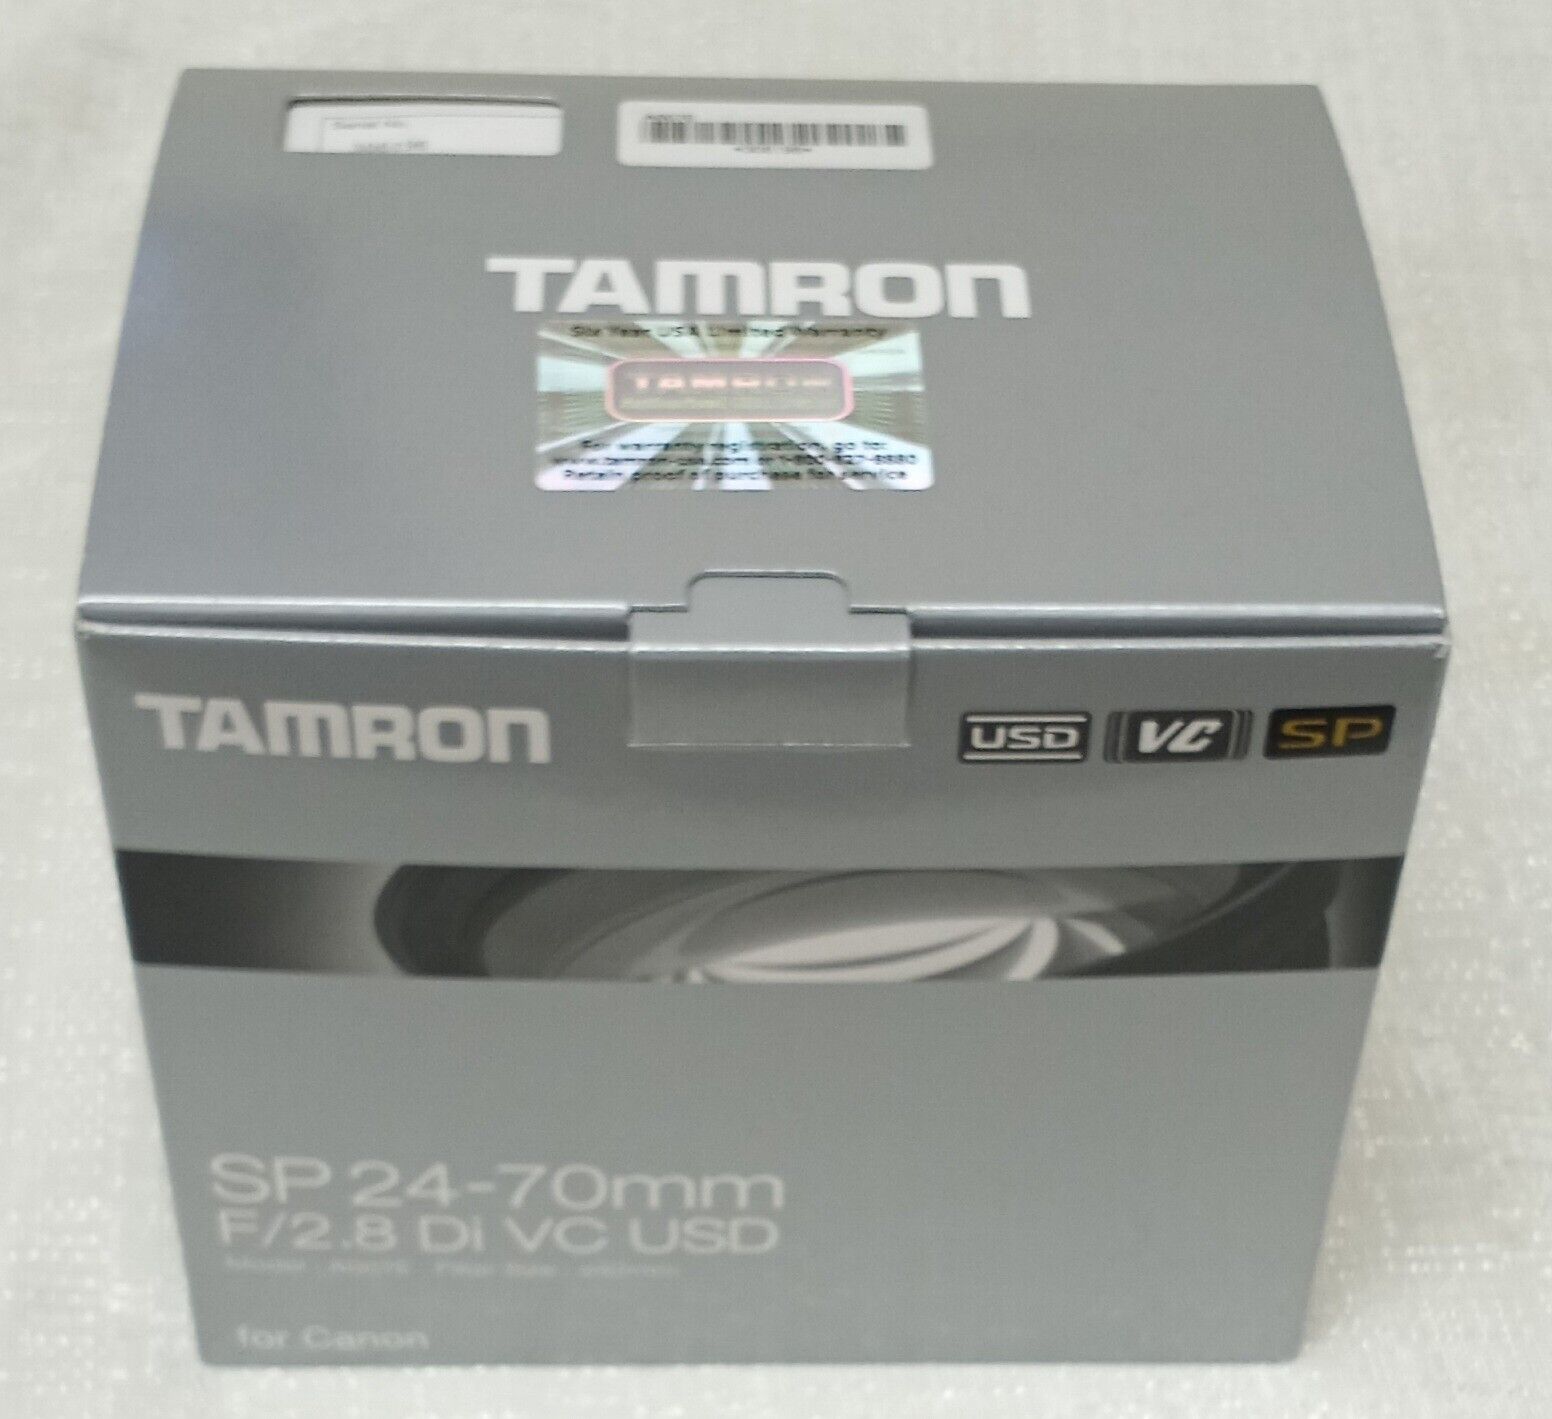 Tamron SP 24-70mm F/2.8 DI A007 Lens for sale online | eBay